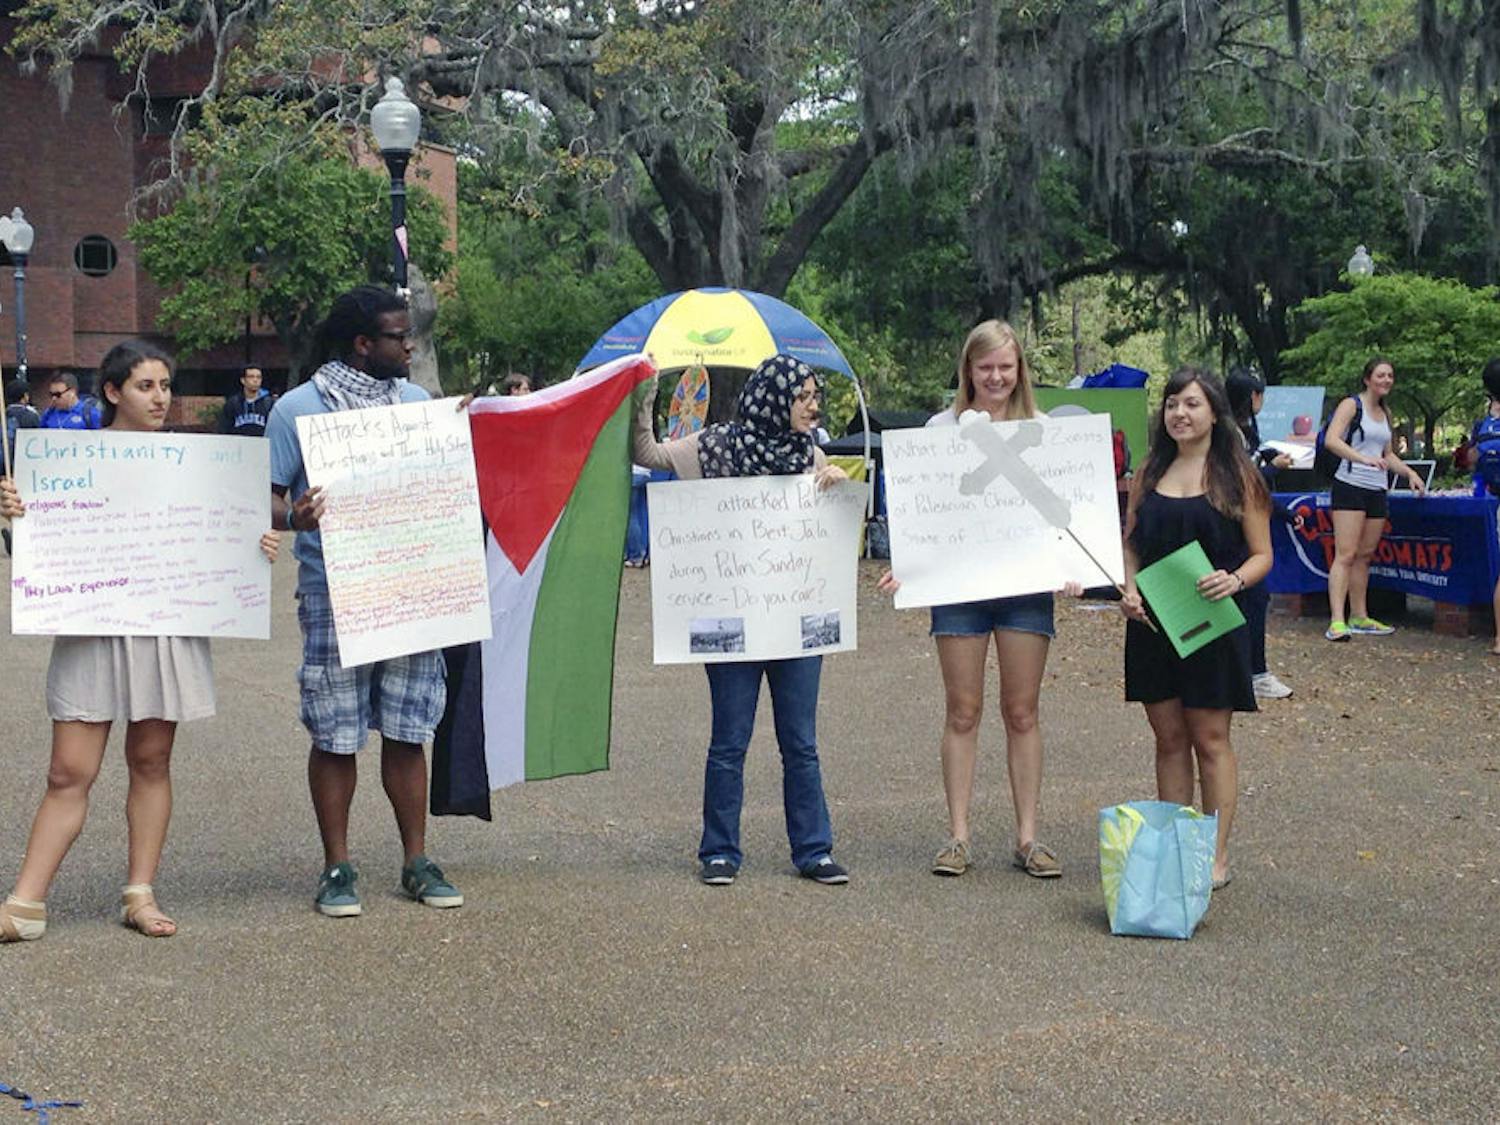 From left: Amanda Bateh, 19, Eric Brown, 21, Tesneem Shraiteh, 21, Amanda Nelson, 21, and Farah Khan, 21, speak on Turlington Plaza on Tuesday about discrimination that Palestinian Christians face as their Easter celebration approaches Sunday. “I feel like this is the least I can do, to be involved in this campus organization,” Bateh said, “because injustice happens every day in Palestine.”